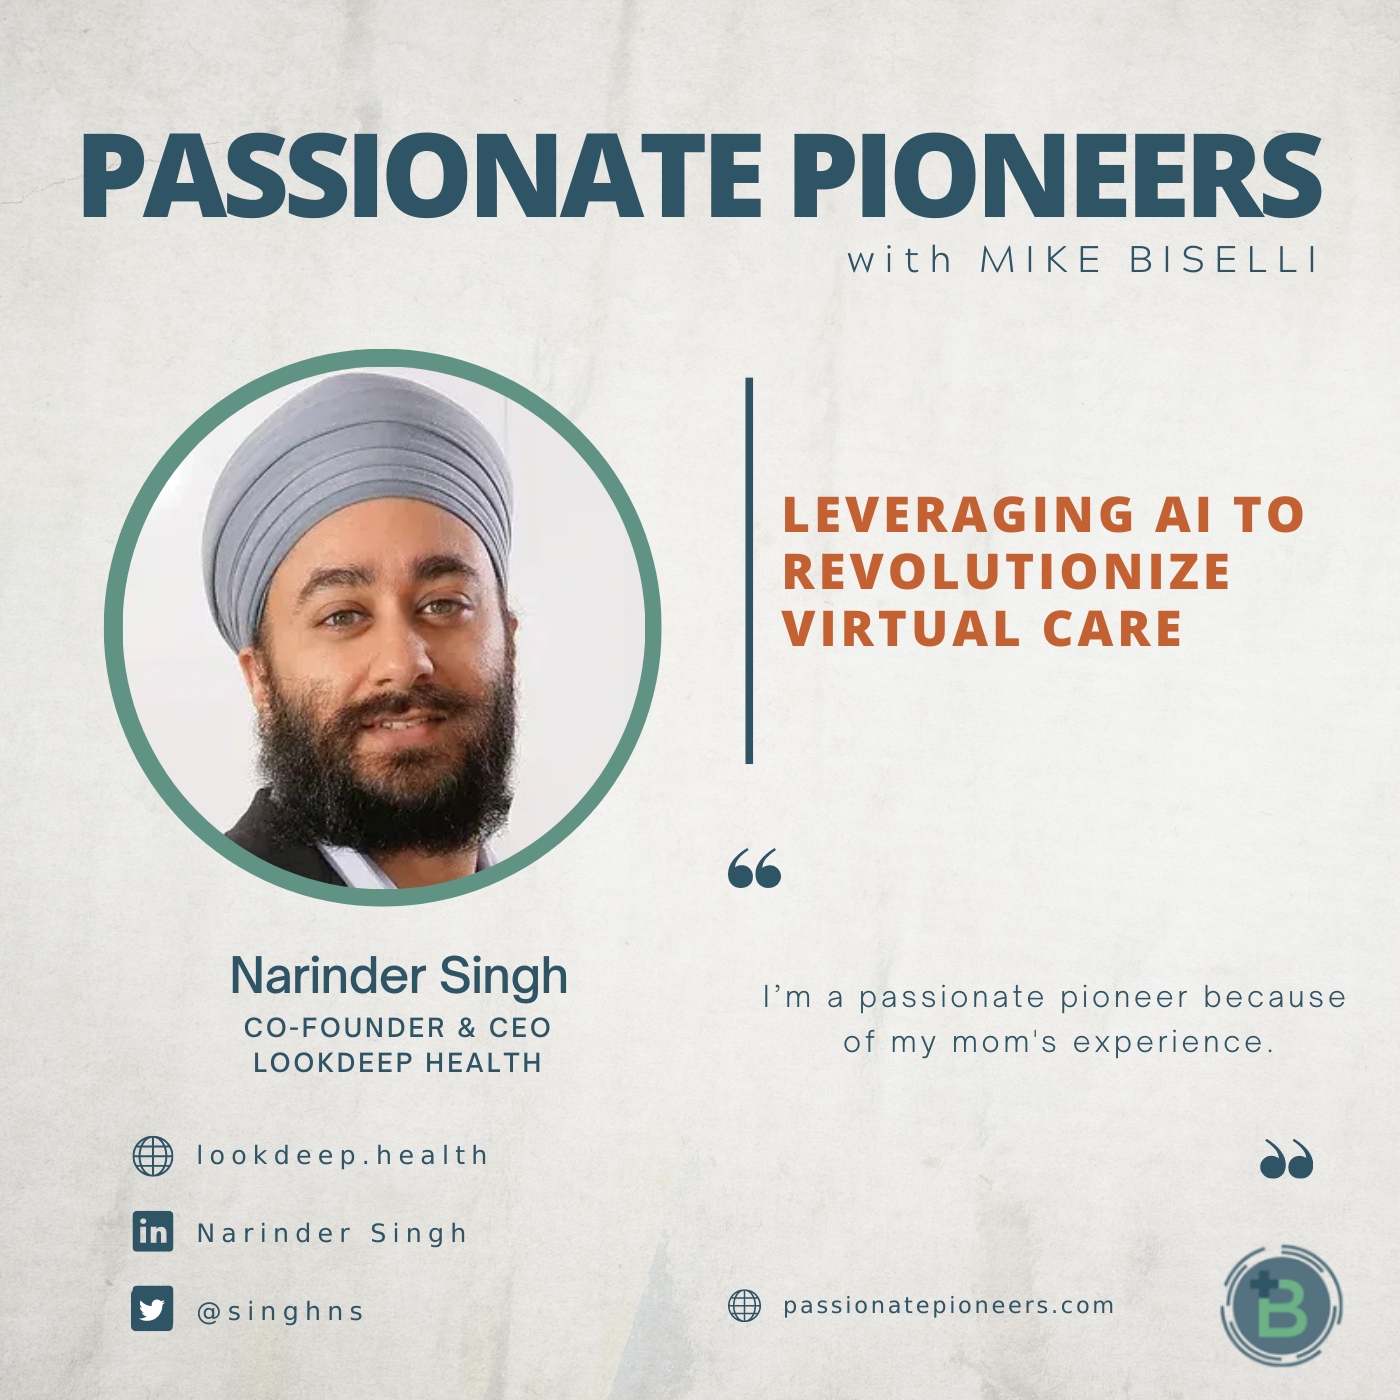 Artwork for podcast Passionate Pioneers with Mike Biselli